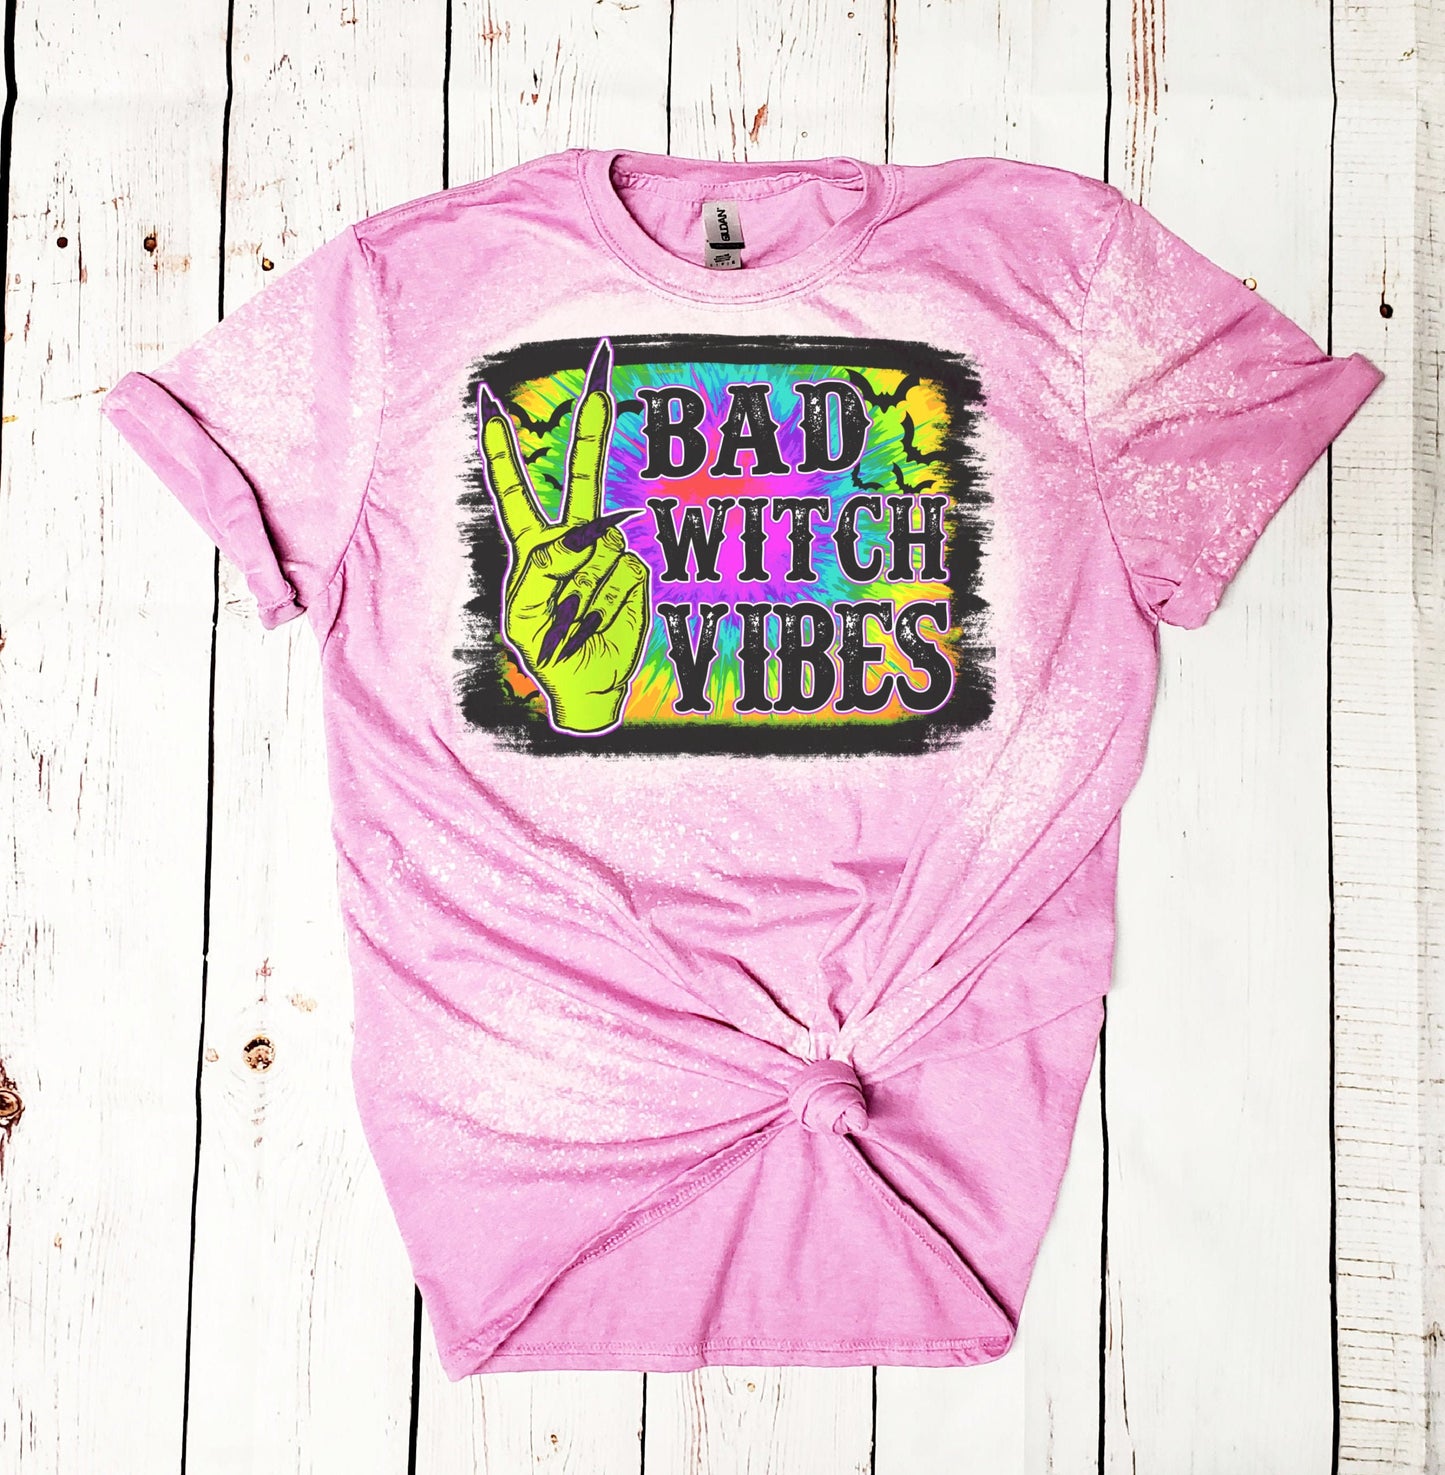 Bad Witch Vibes Tie Dye Bleached Shirt / Halloween Shirts / Fall Fashion Her Mom Women / Bleached Witch Shirts / Tie Dye Halloween Shirts - Farmhouse Vinyl Co